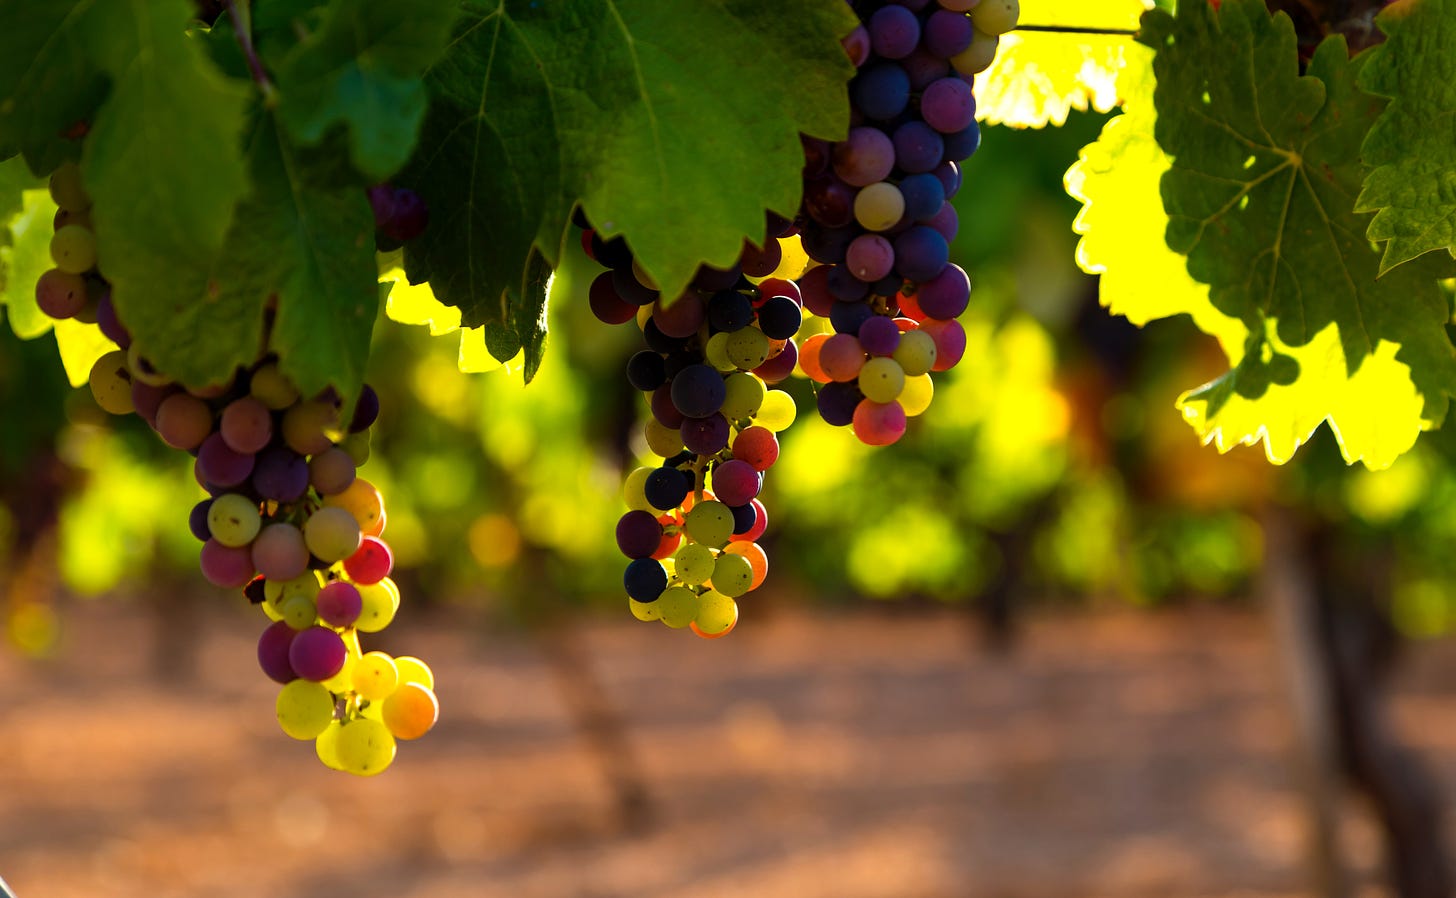 a picture of grapes in a vineyard on the vine